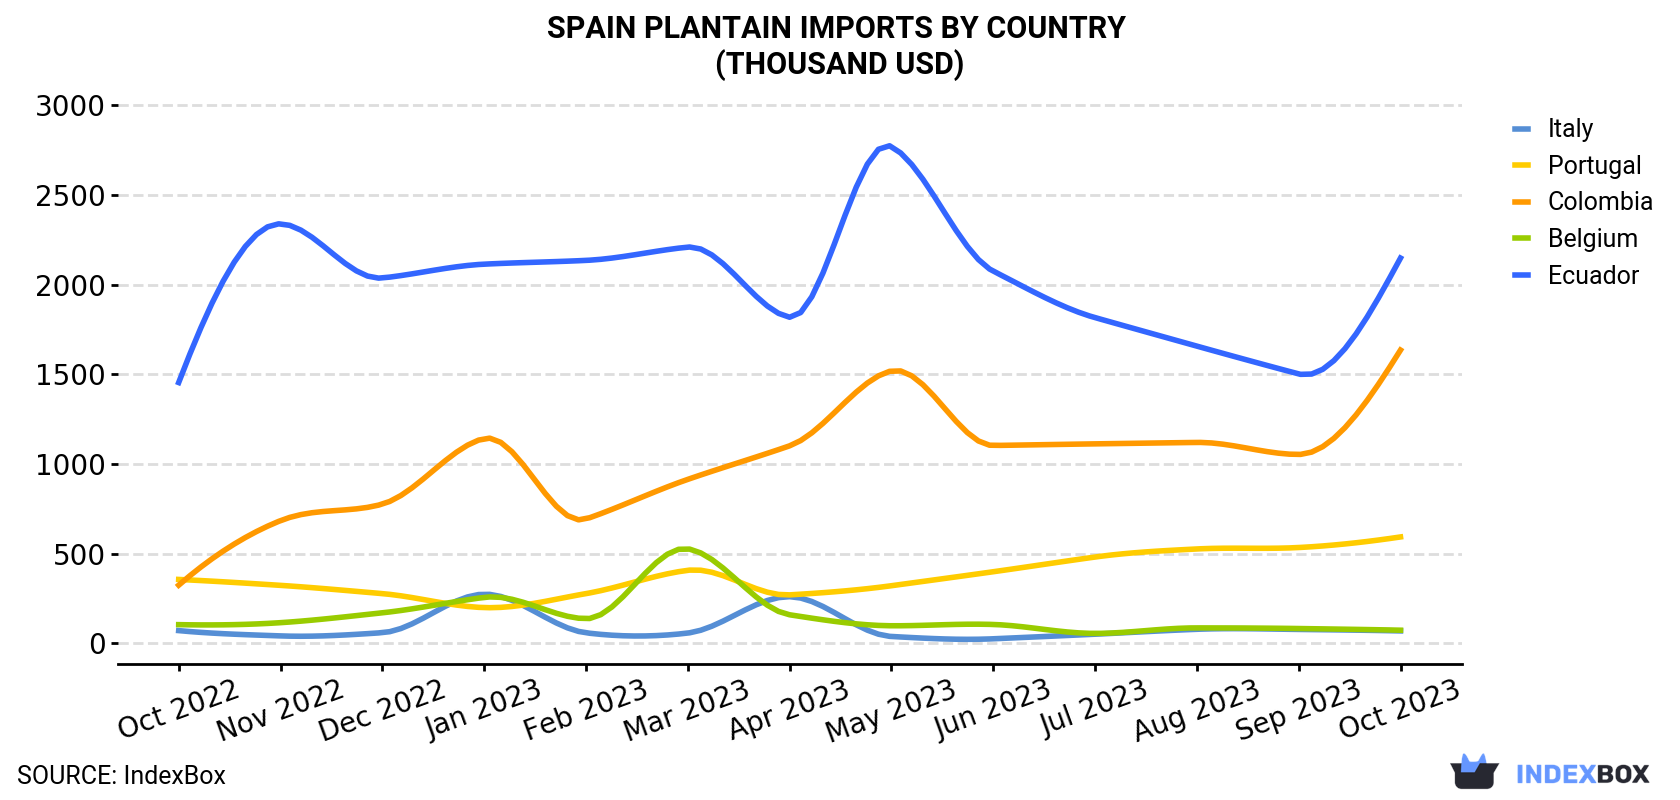 Spain Plantain Imports By Country (Thousand USD)